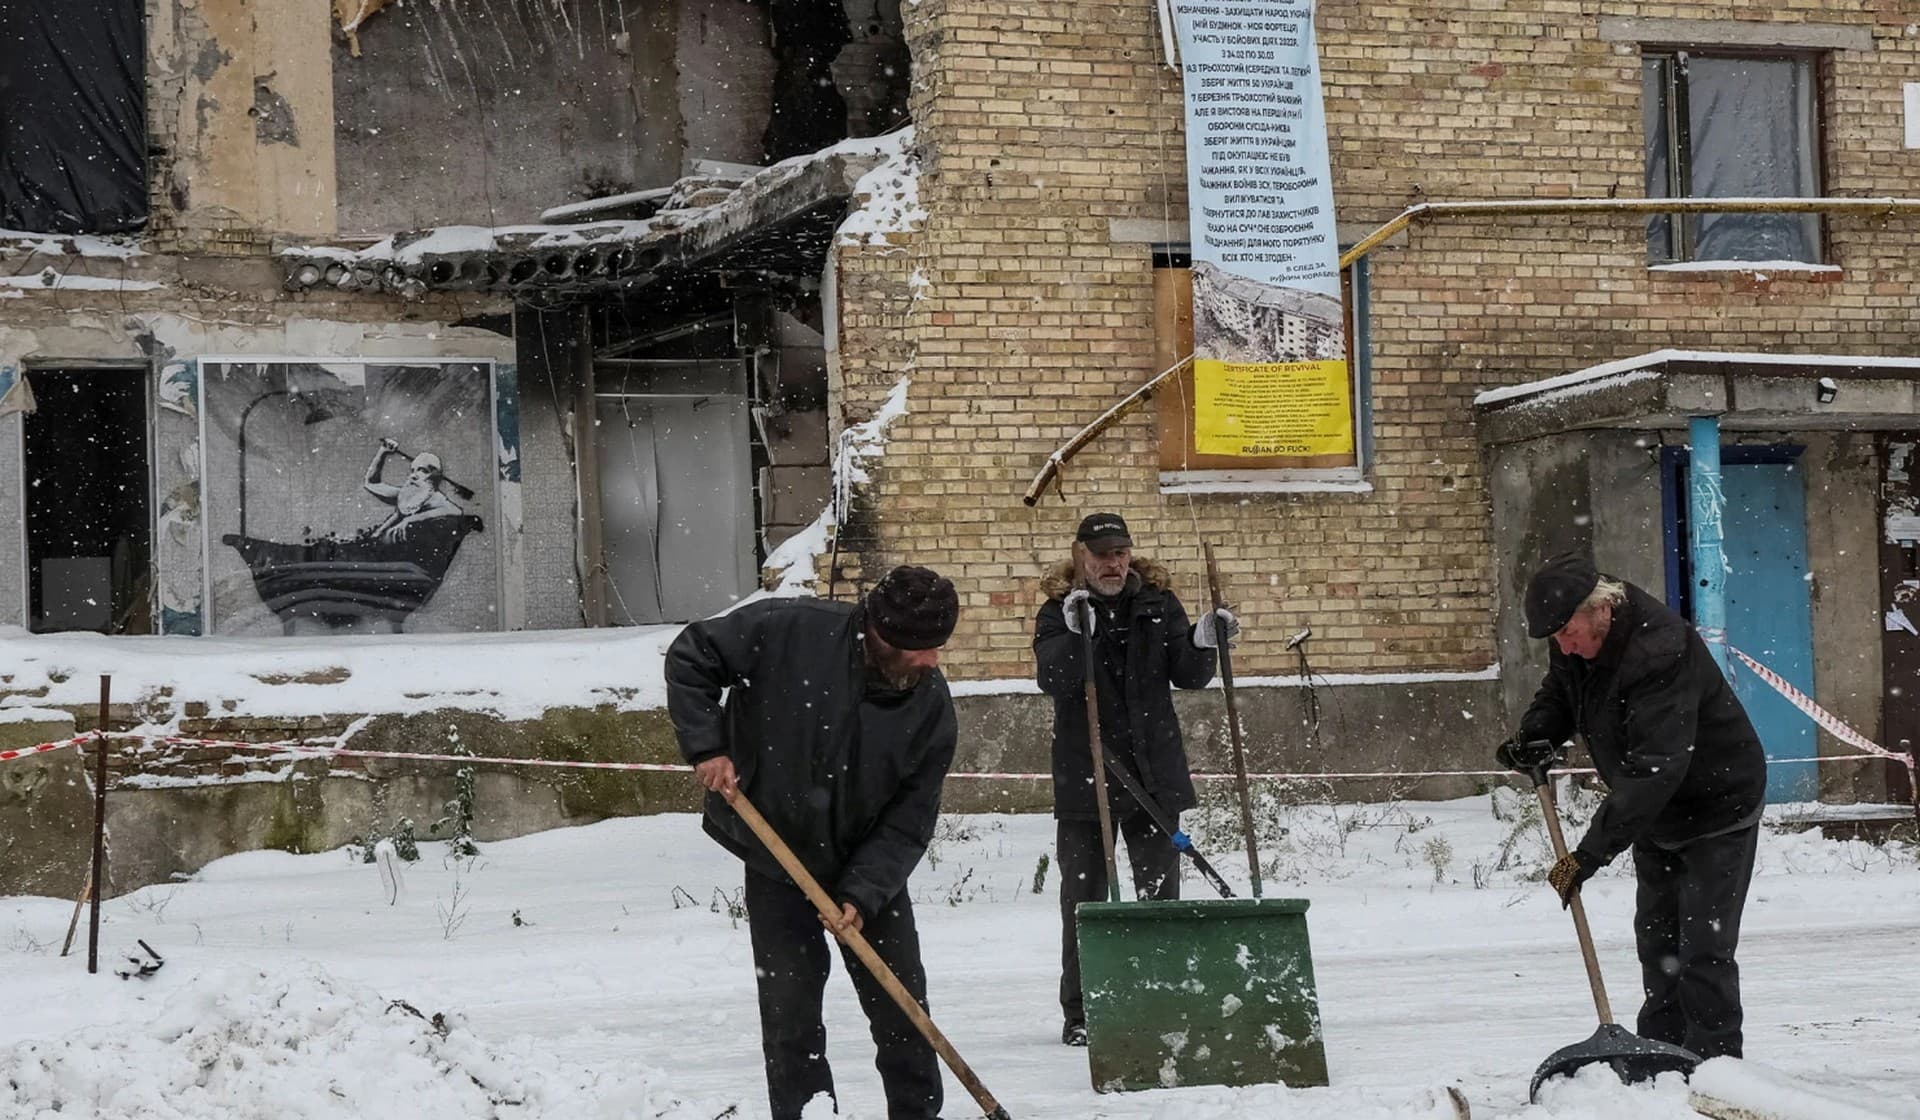 Local residents shovel snow as a work of world-renowned graffiti artist Banksy is displayed on the wall of a destroyed building in the Ukrainian village of Horenka